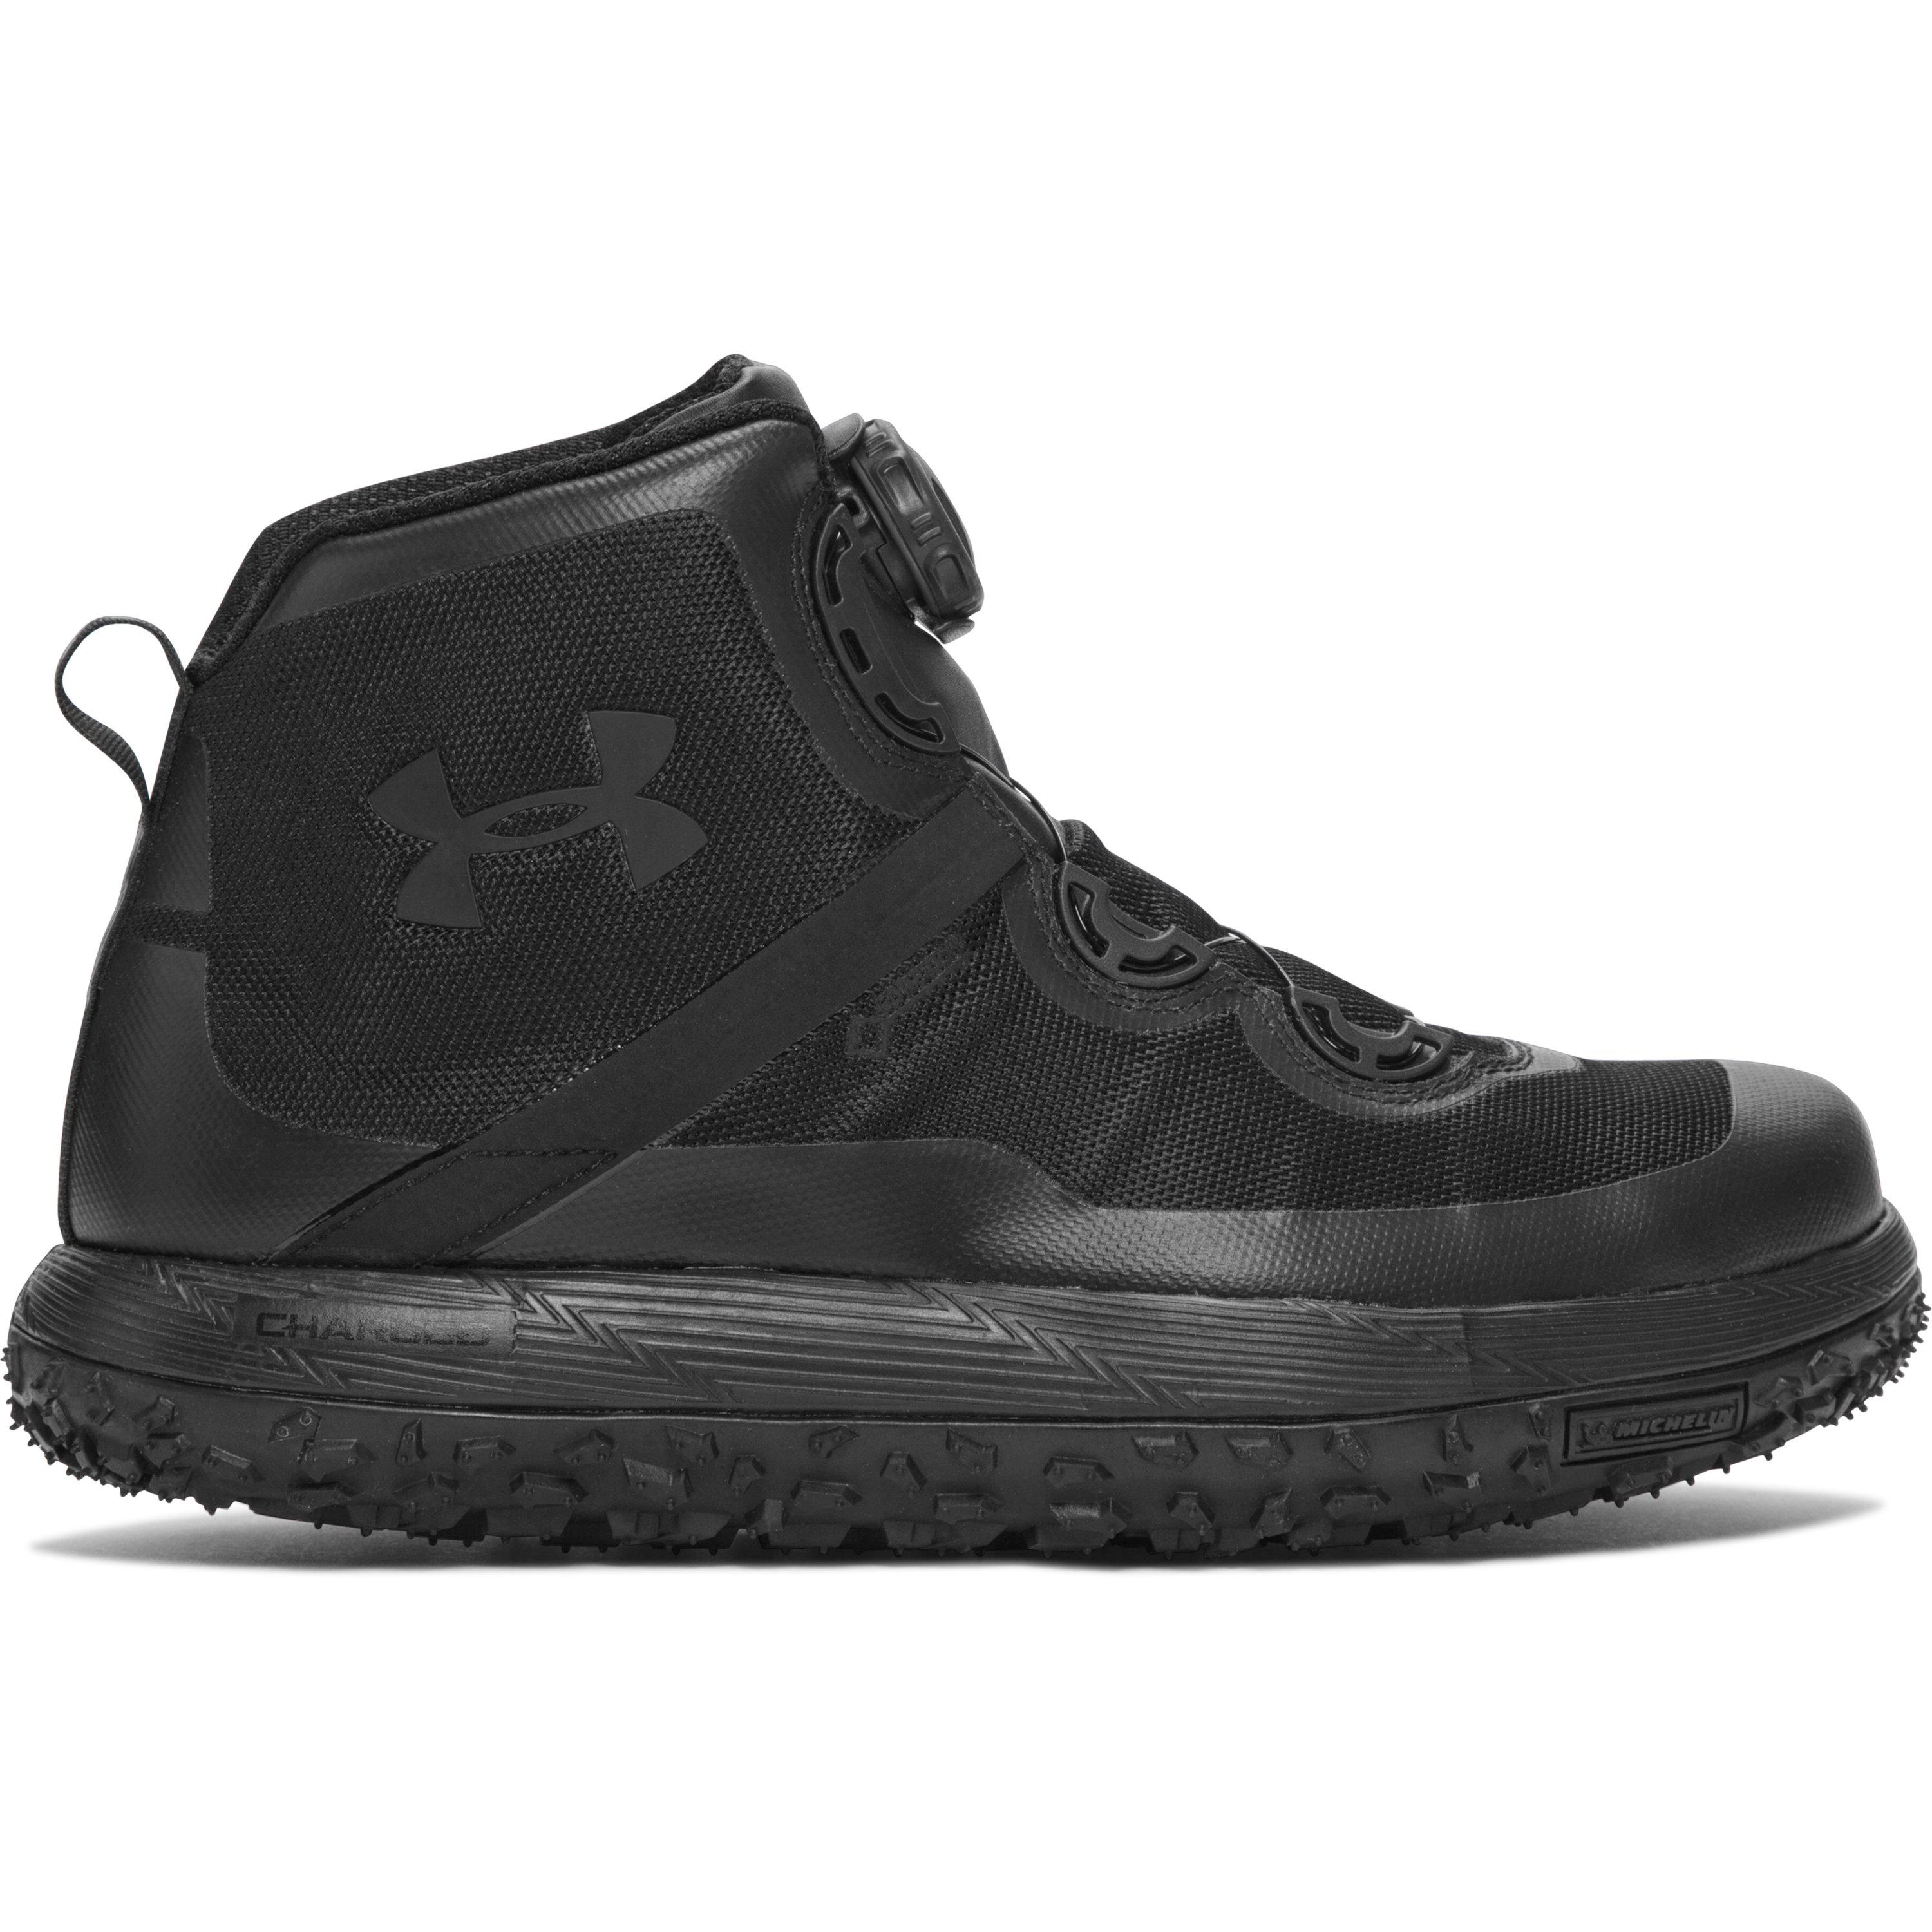 Lyst - Under Armour Men's Ua Fat Tire Gore-tex® Hiking Boots in Black ...